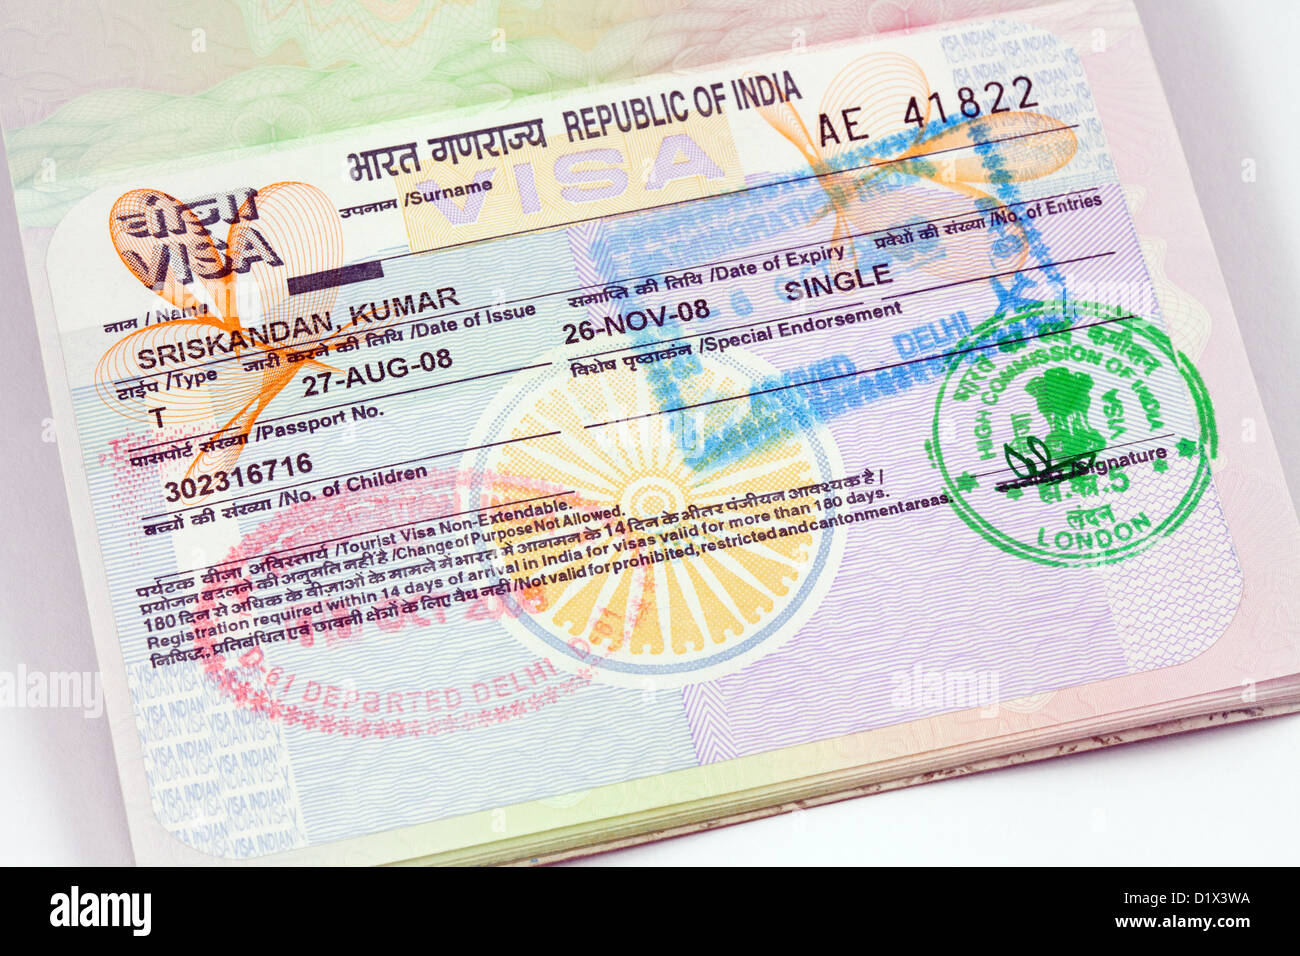 India visa for entry for holiday travel in a UK passport, UK Stock Photo